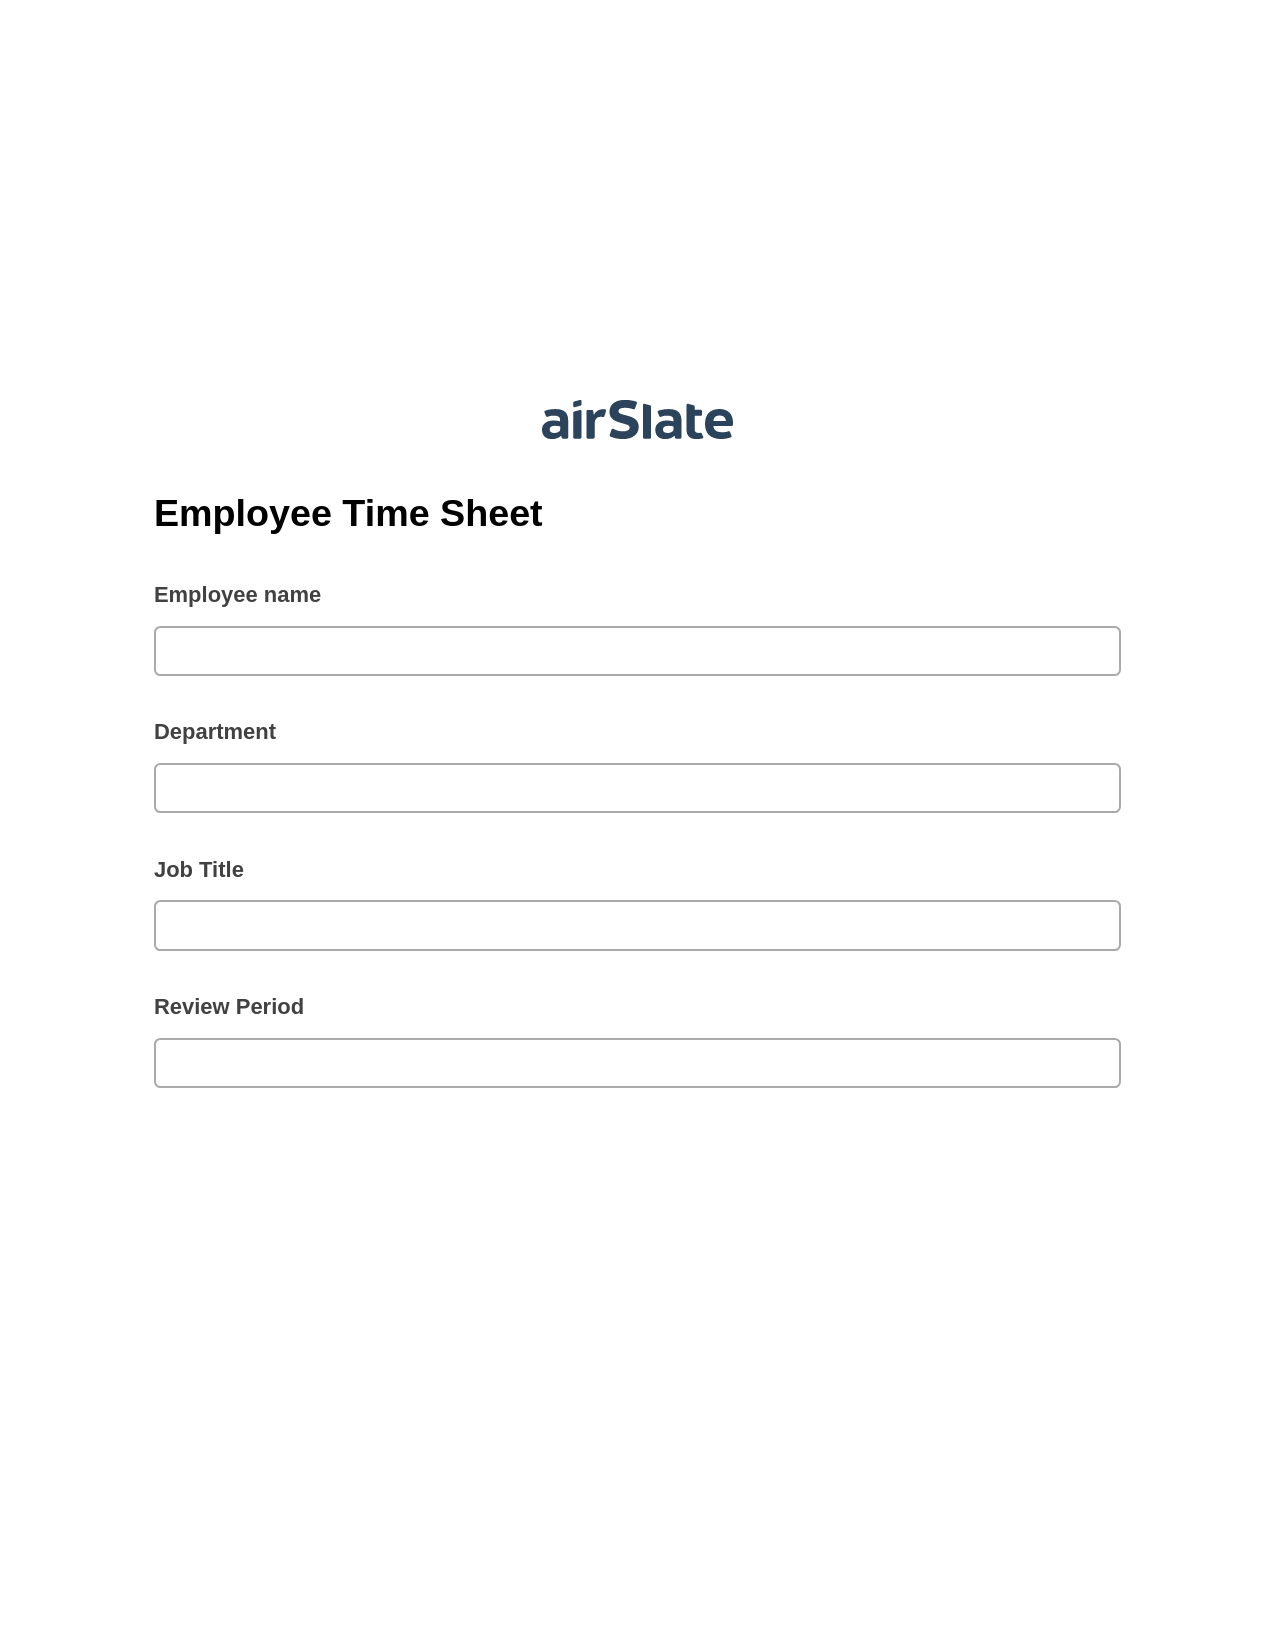 Multirole Employee Time Sheet Pre-fill from Office 365 Excel Bot, Update Audit Trail Bot, Export to Smartsheet